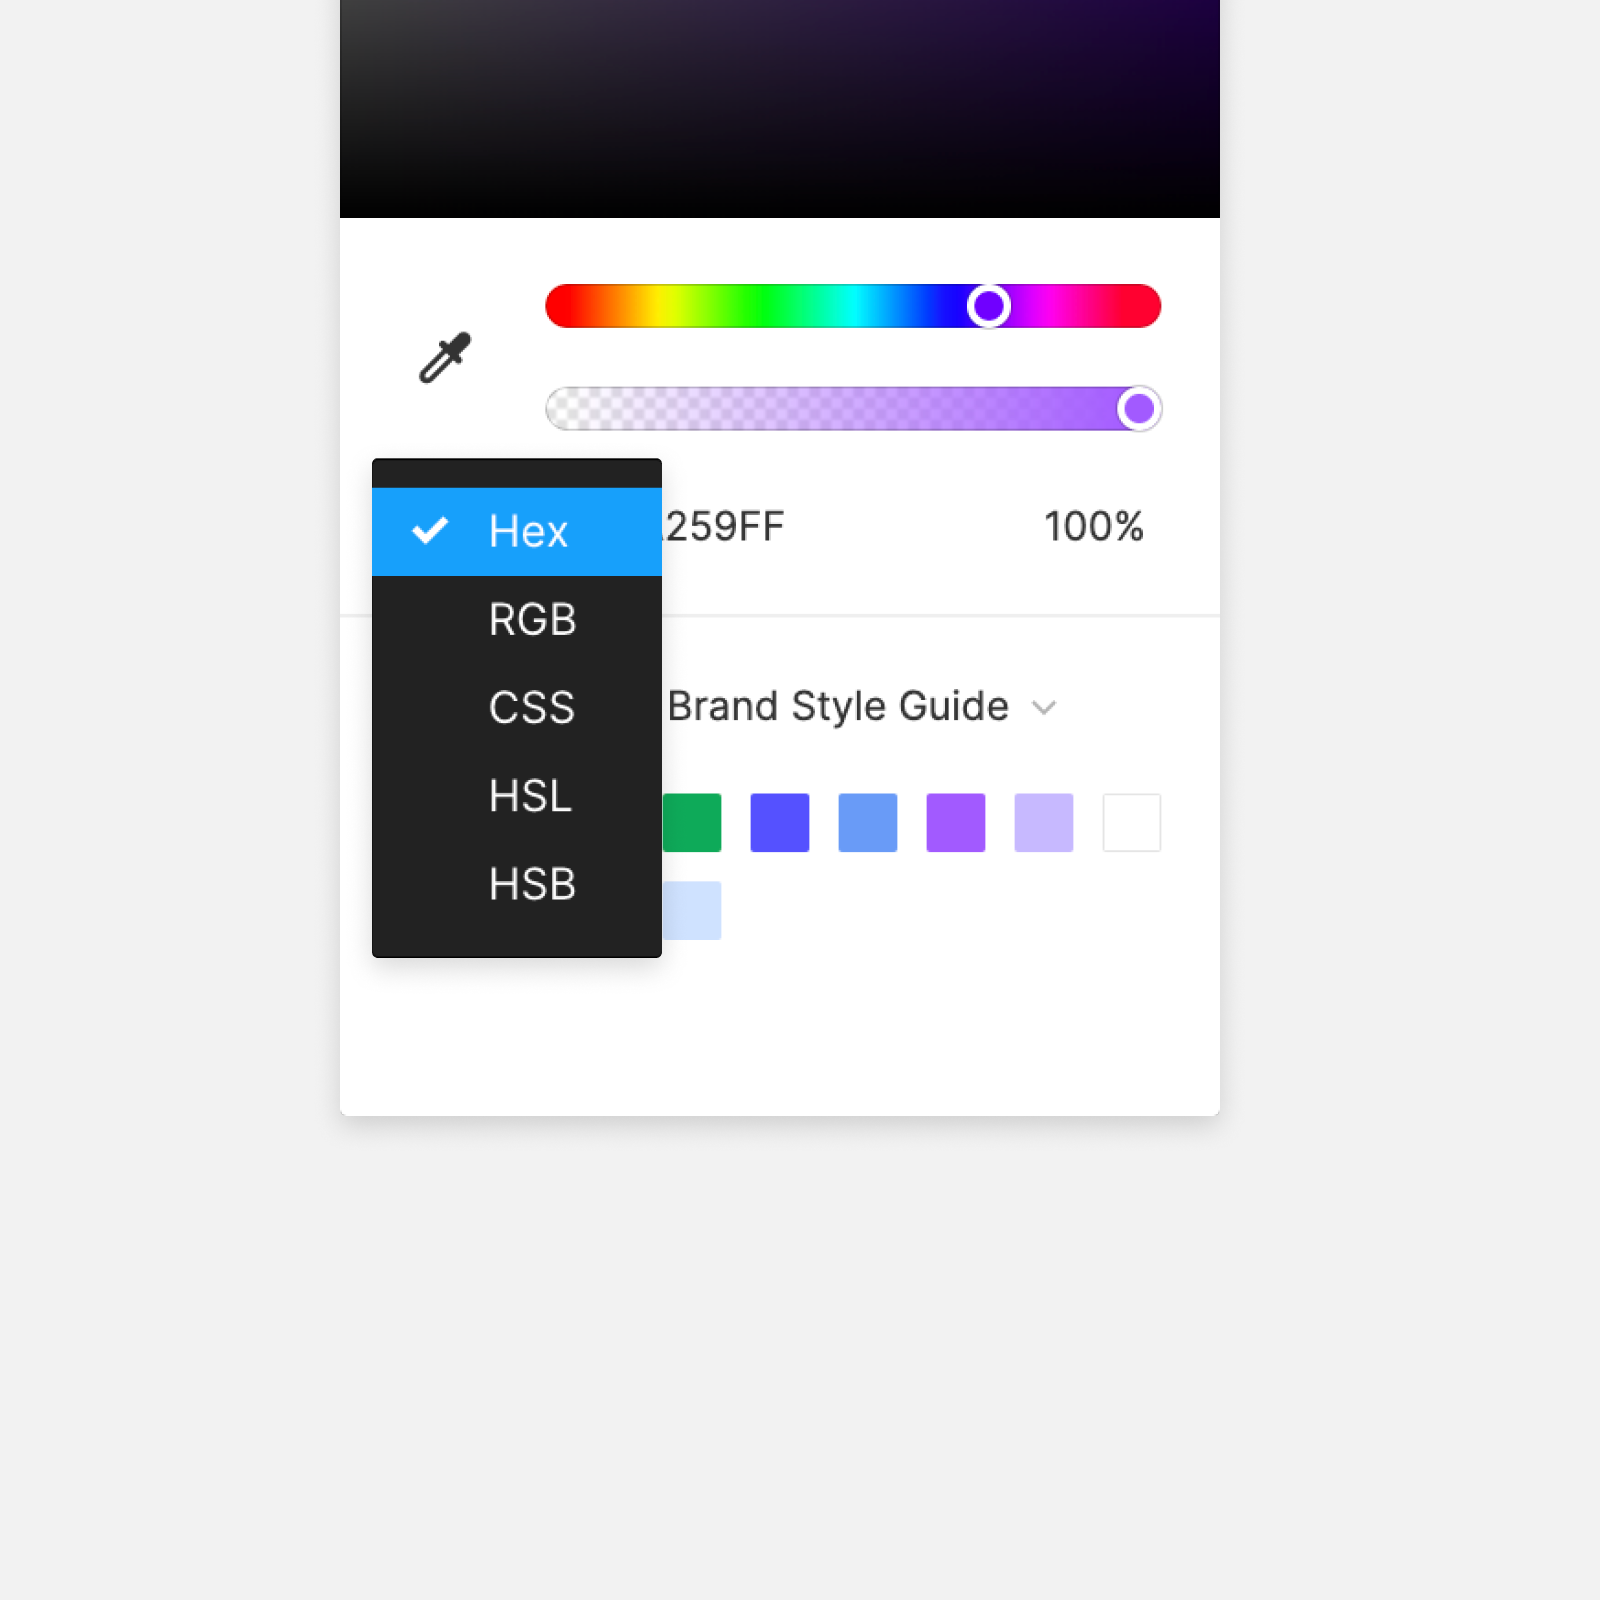 Image showing the color models available in the color picker